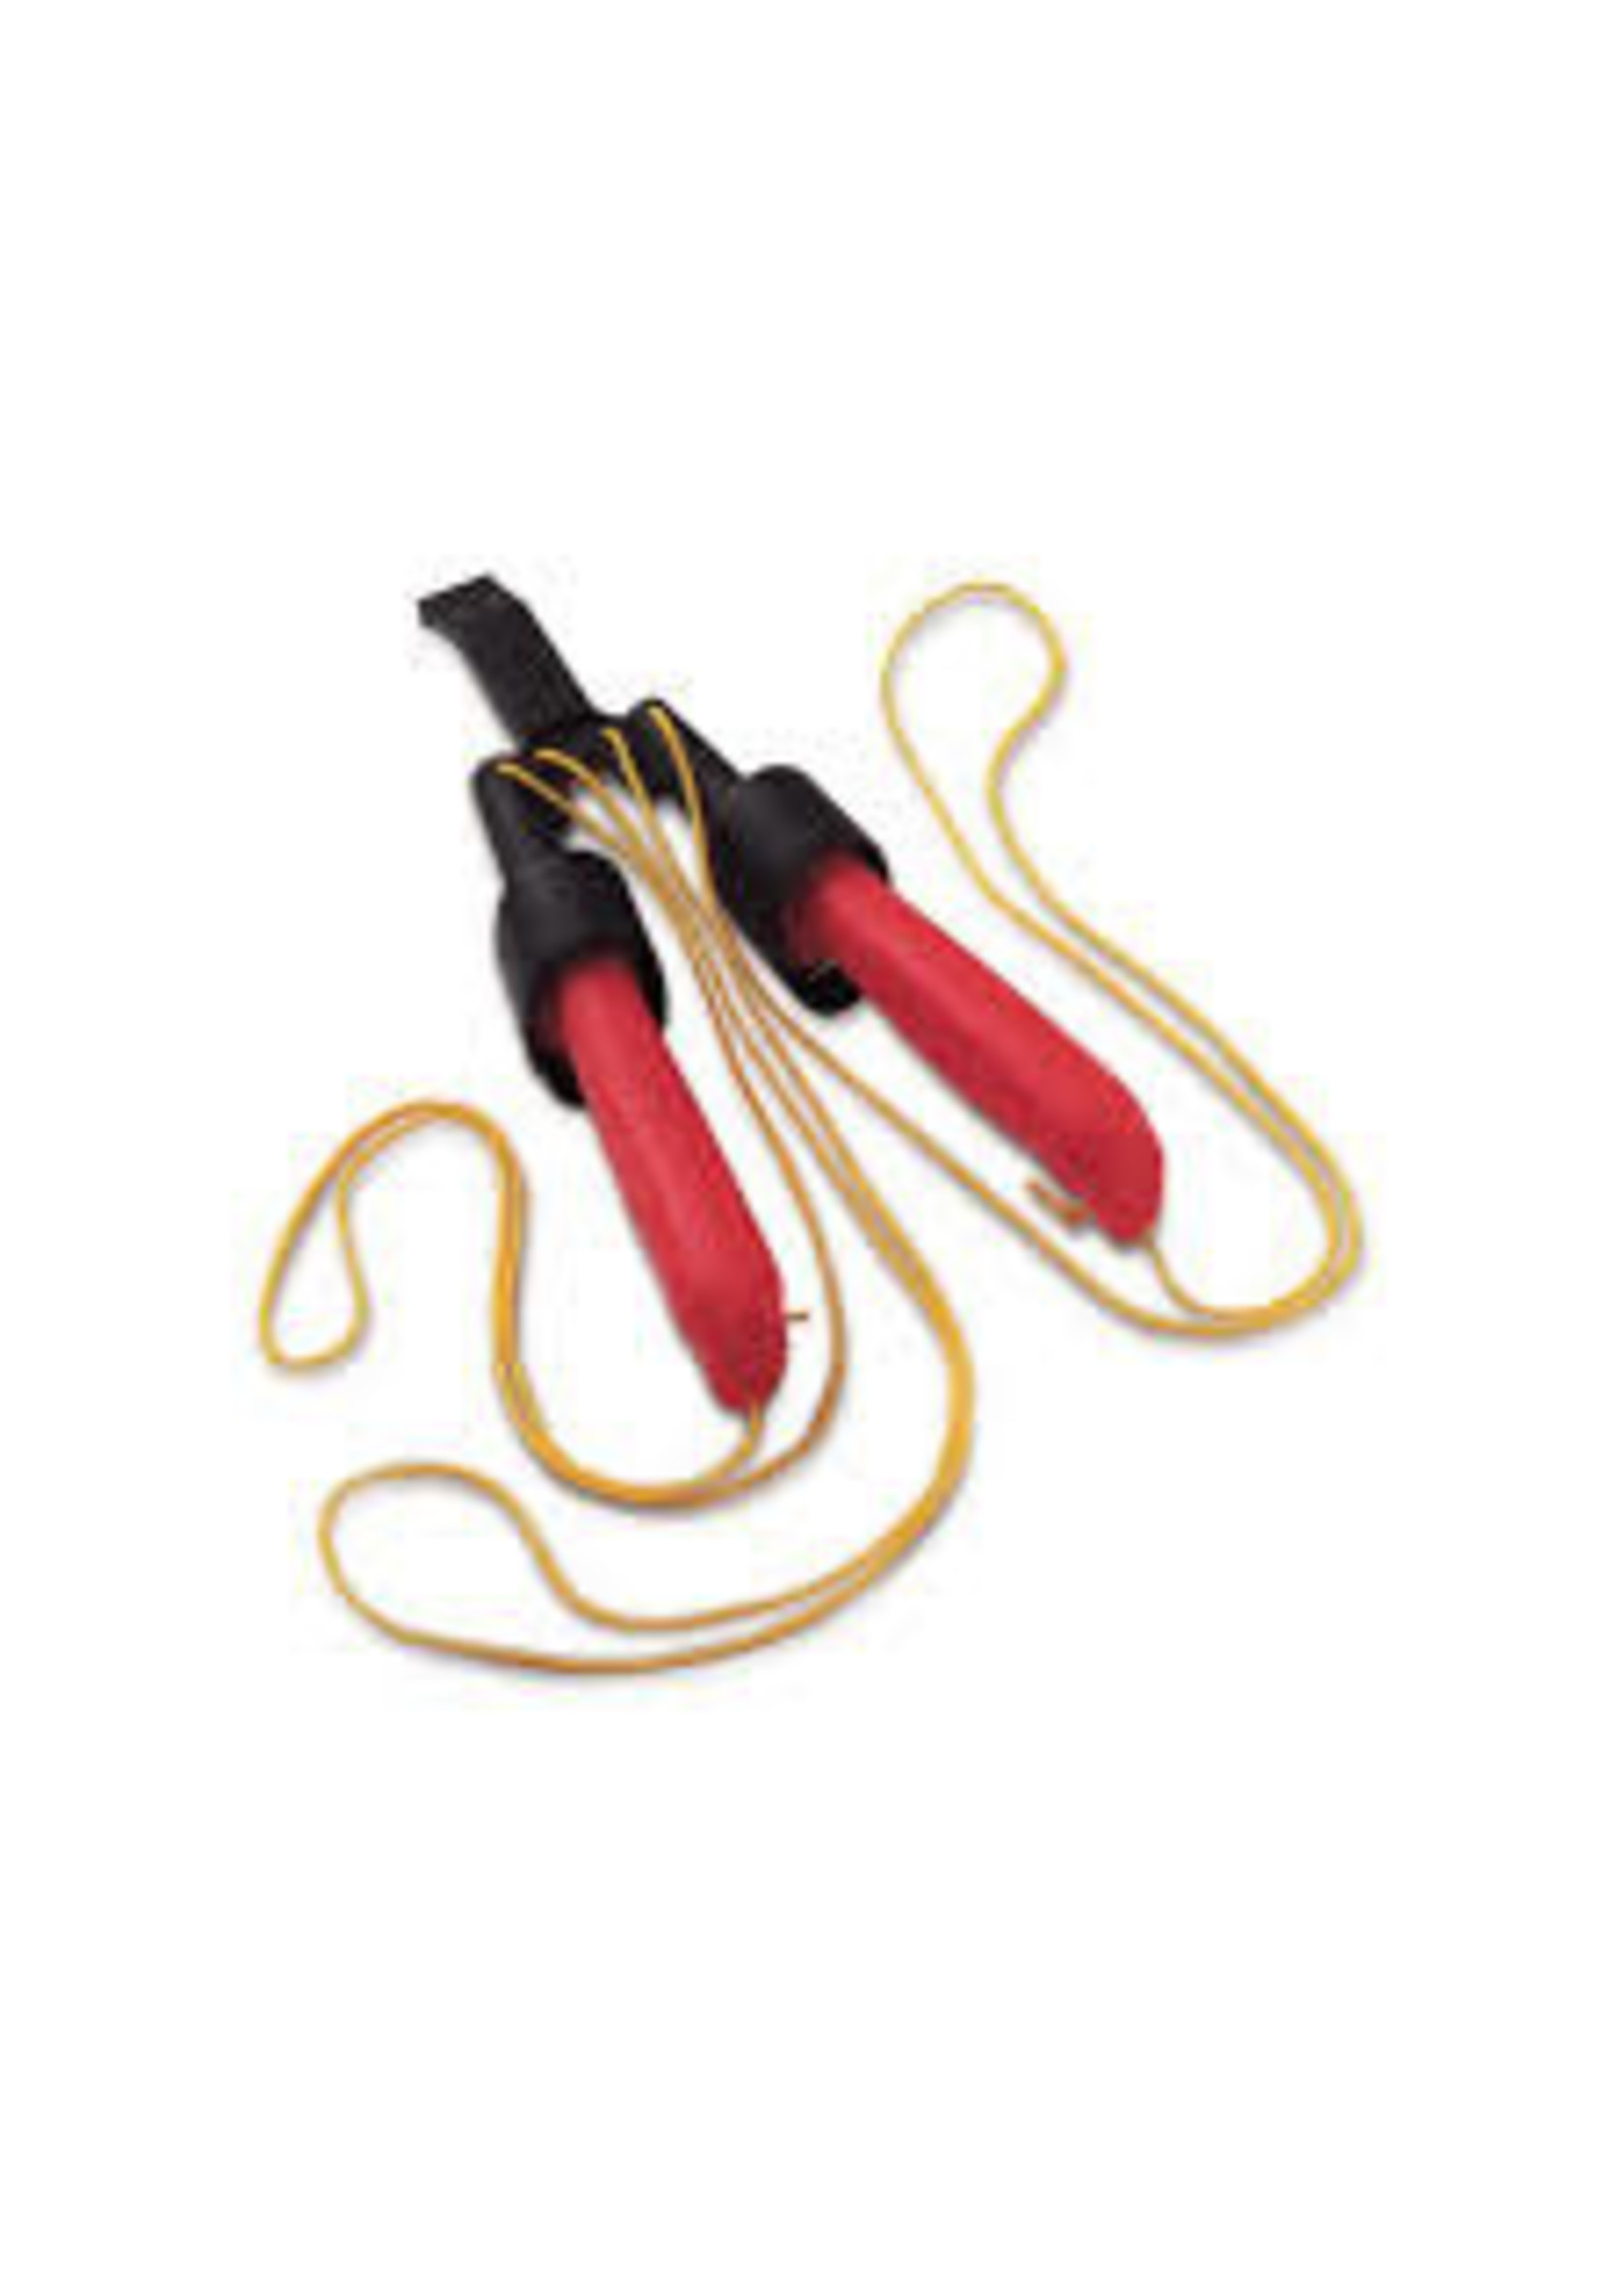 RAPALA NORMARK ICE CLAWS SAFETY SPIKE